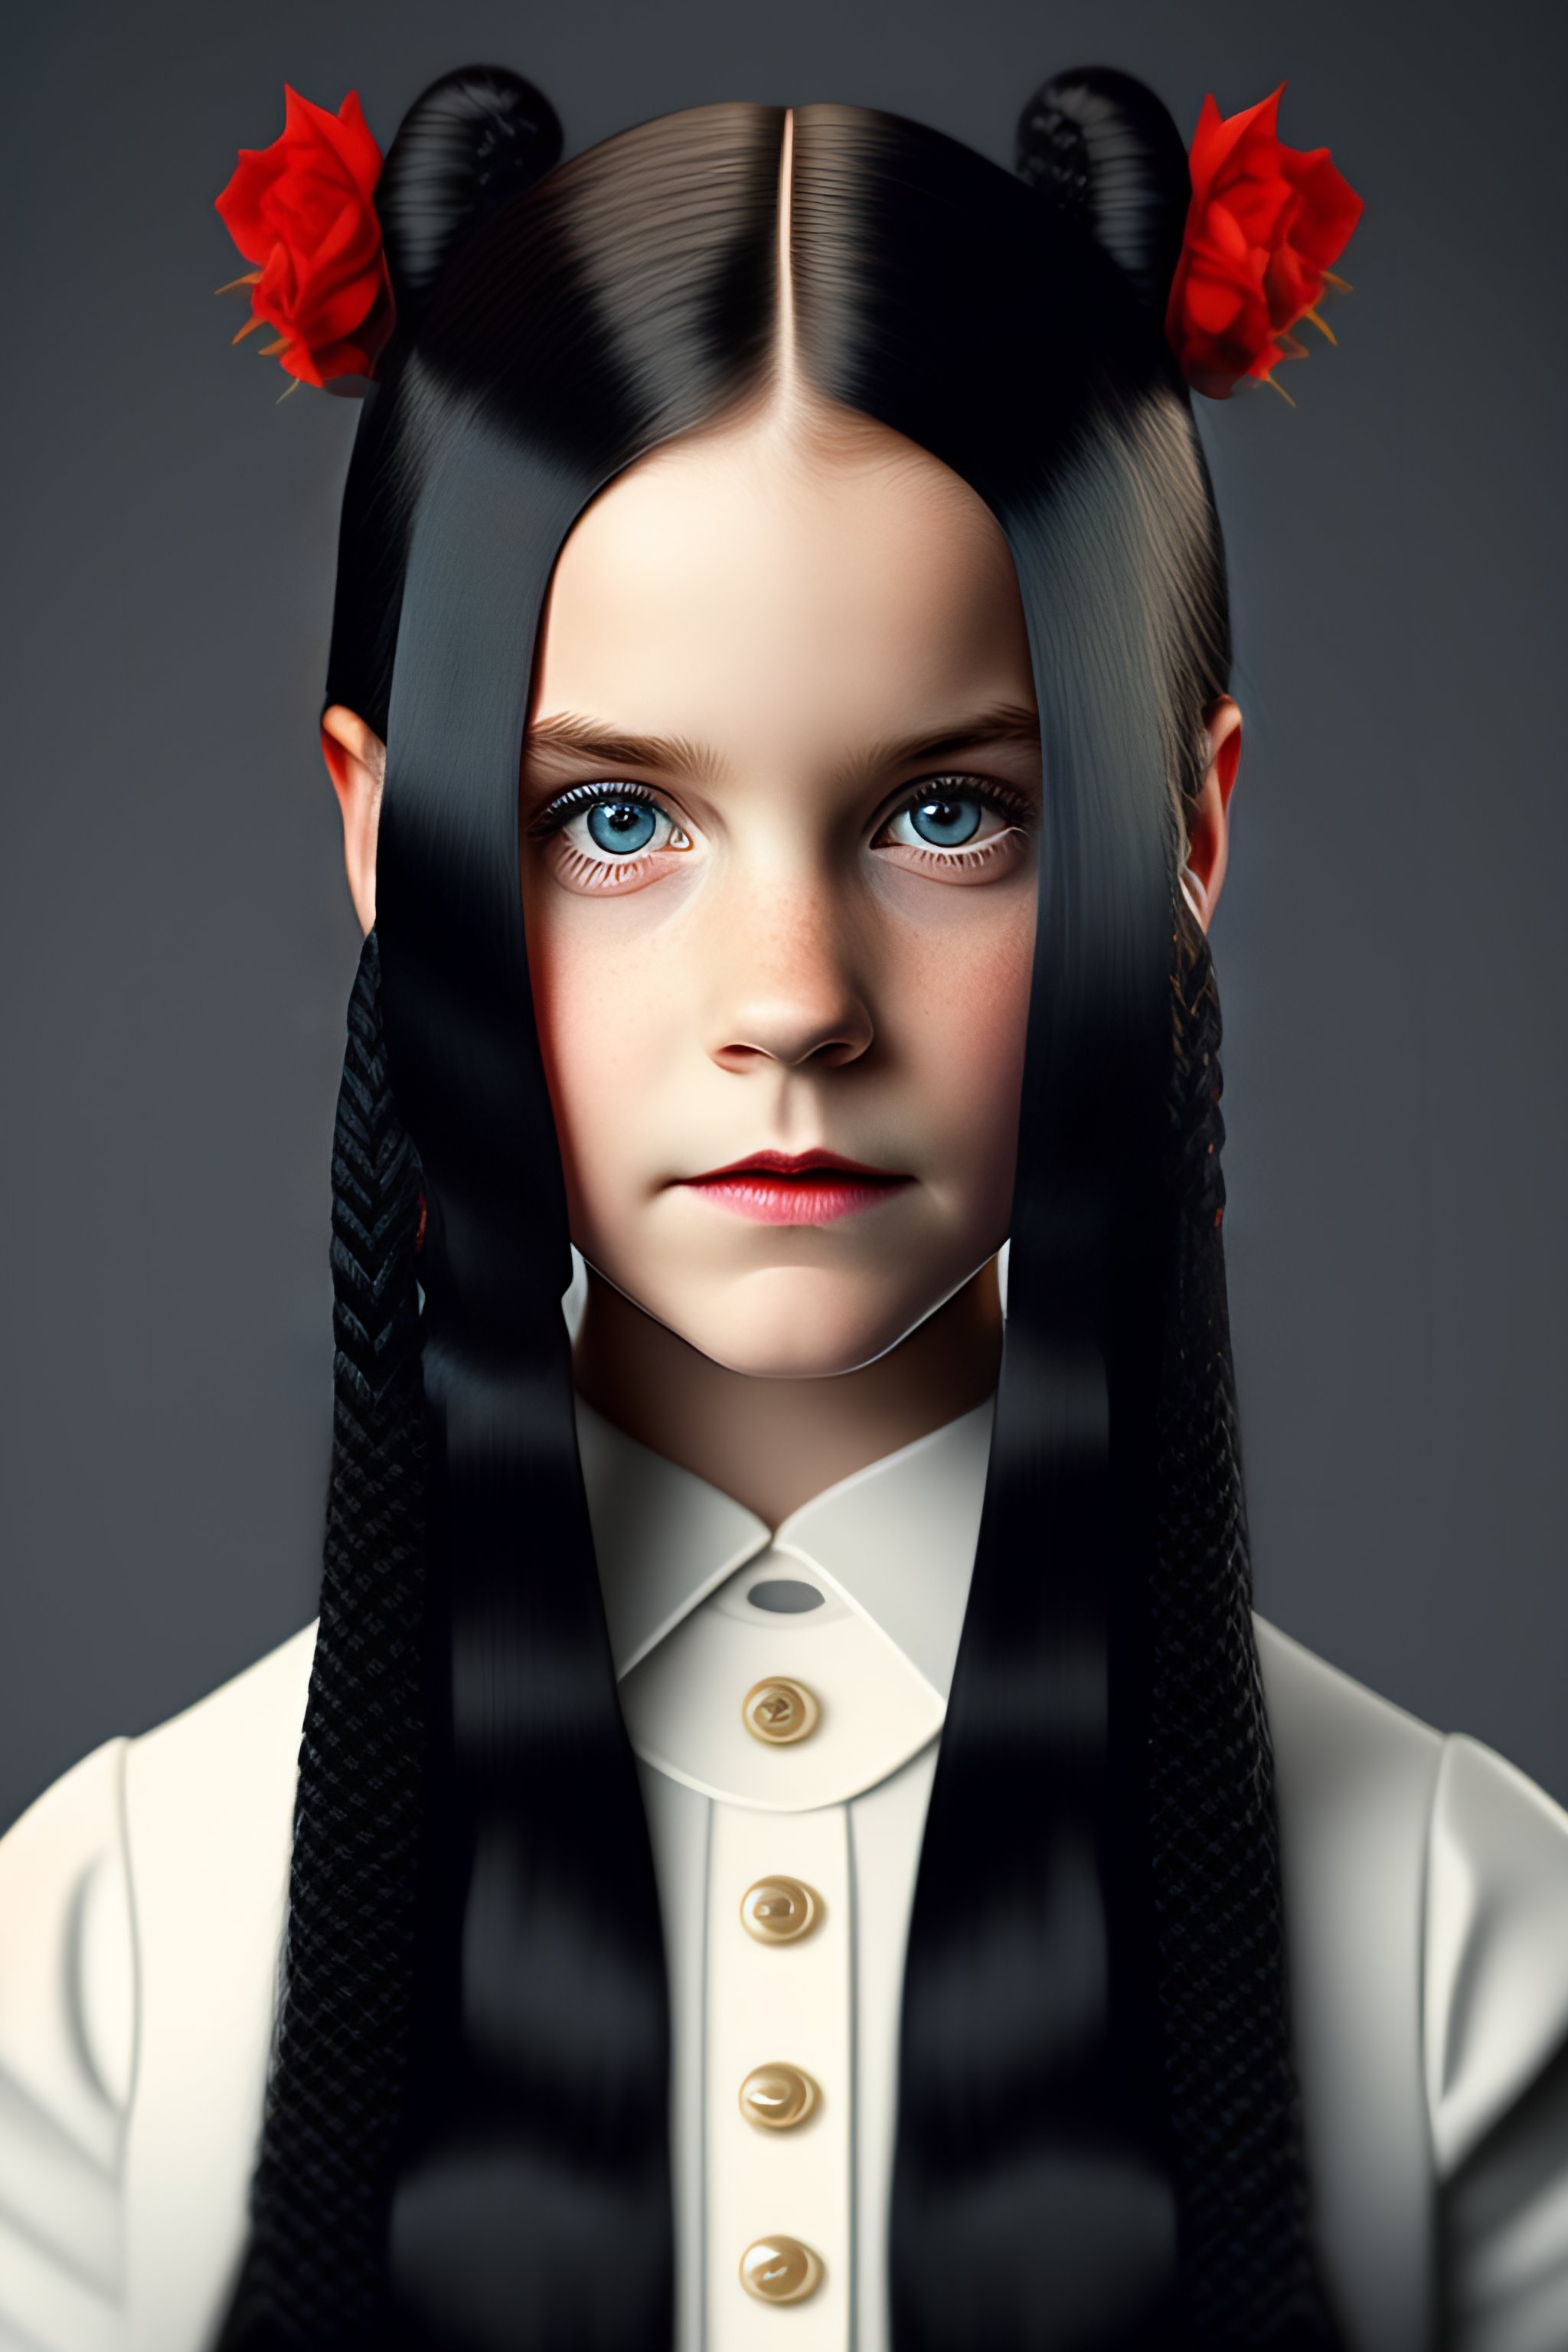 Lexica - Wednesday Addams from the series, black hair braided in two ...